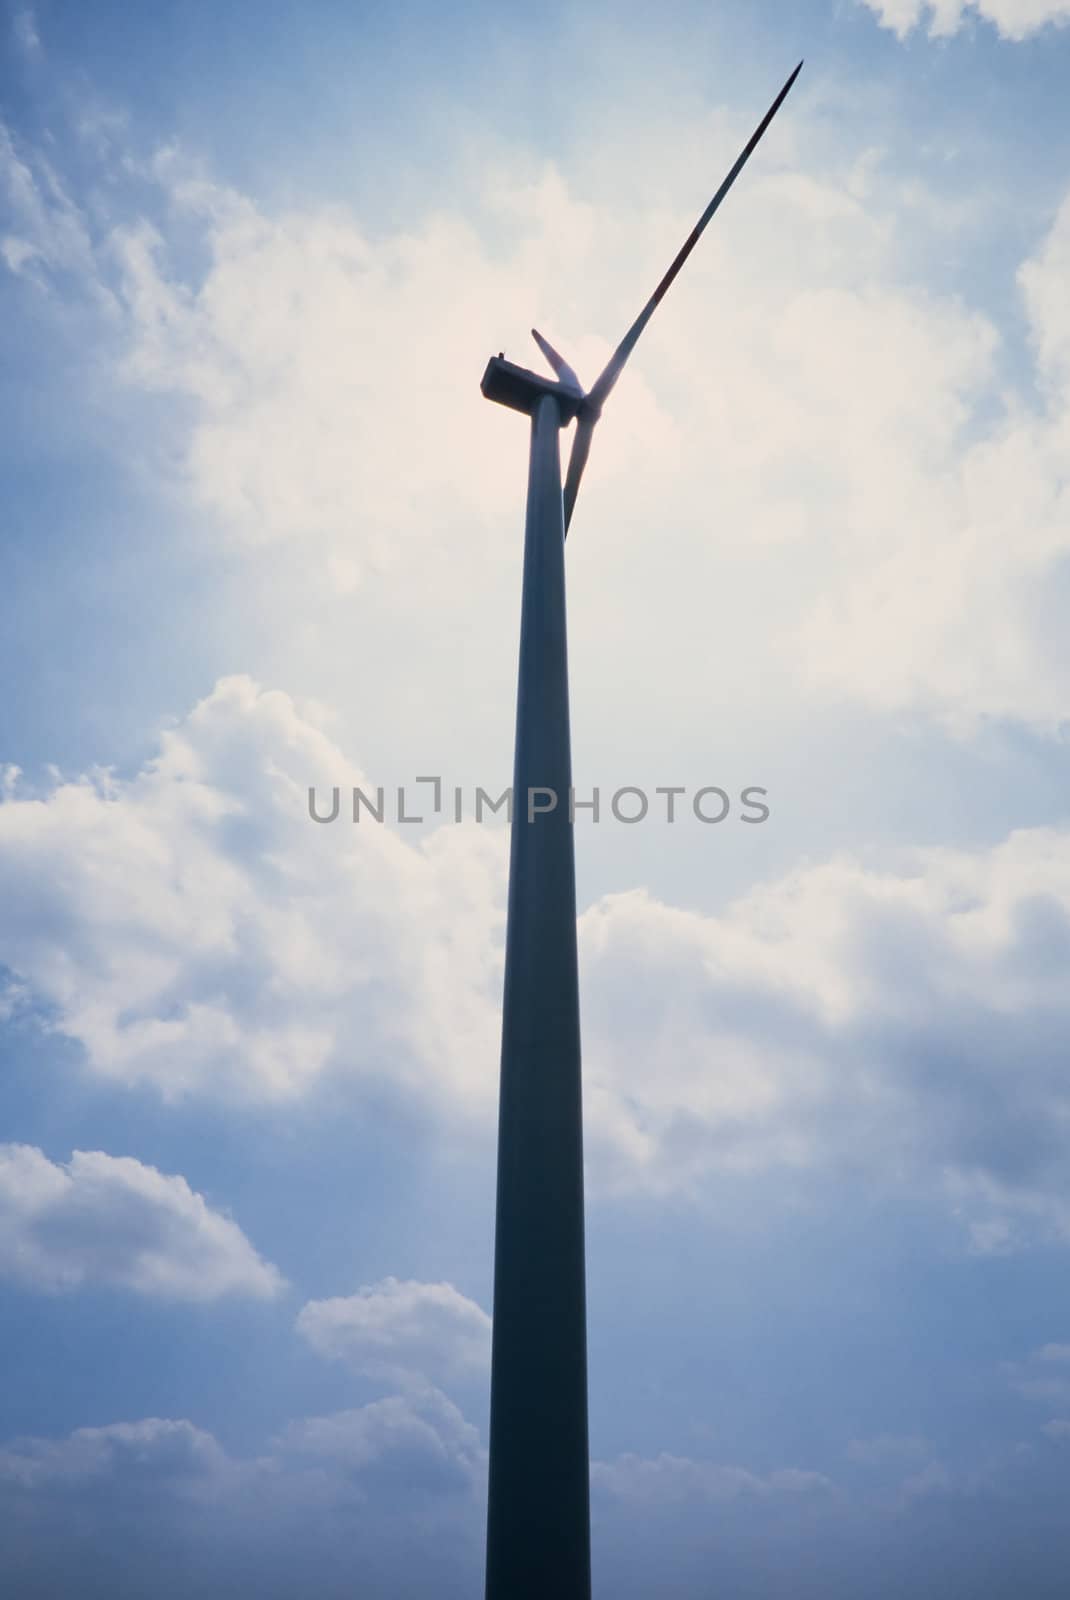 Sun right behind wind turbine by PiLens